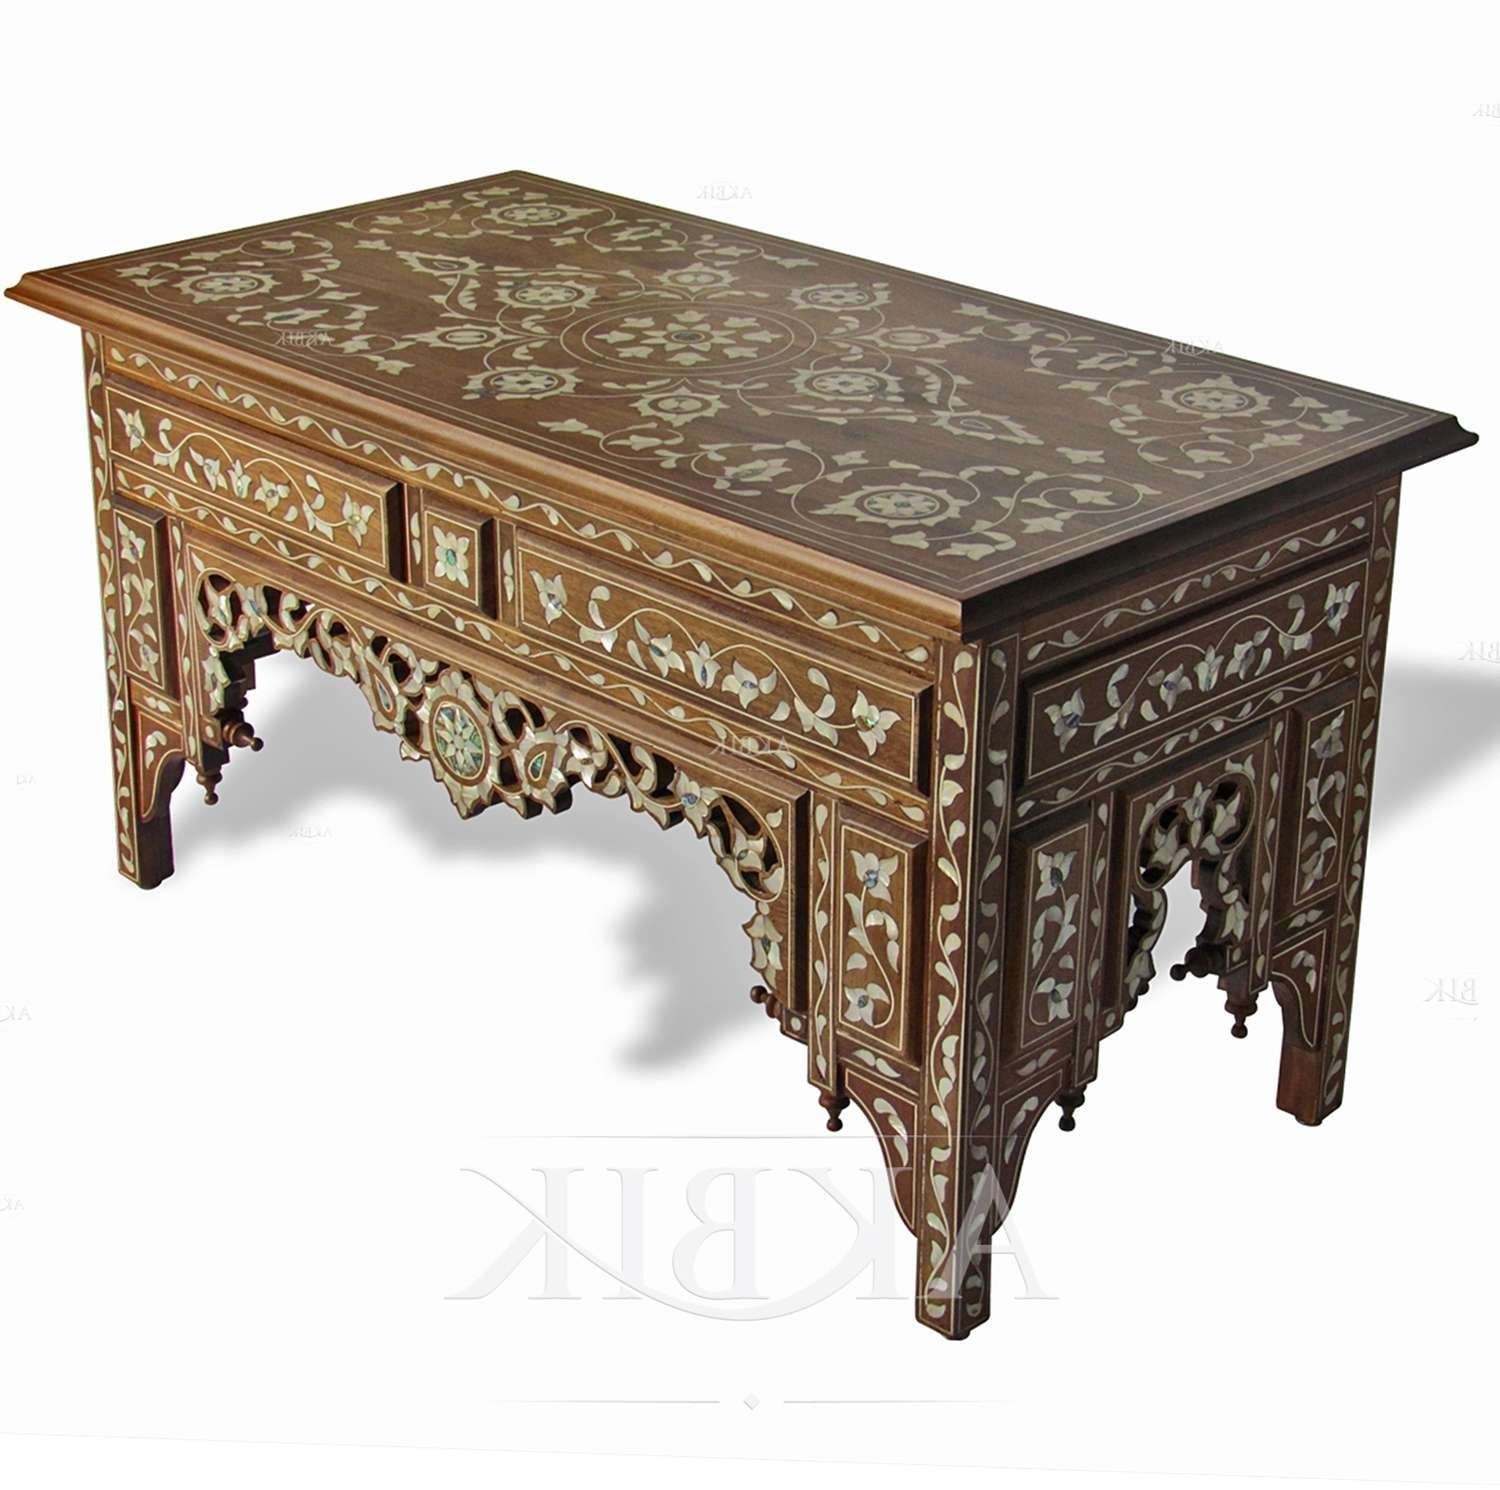 Trendy Mother Of Pearl Coffee Tables With Regard To Mediterranean, Levantine & Syrian Furniture Inlaid With Mother Of (View 8 of 20)